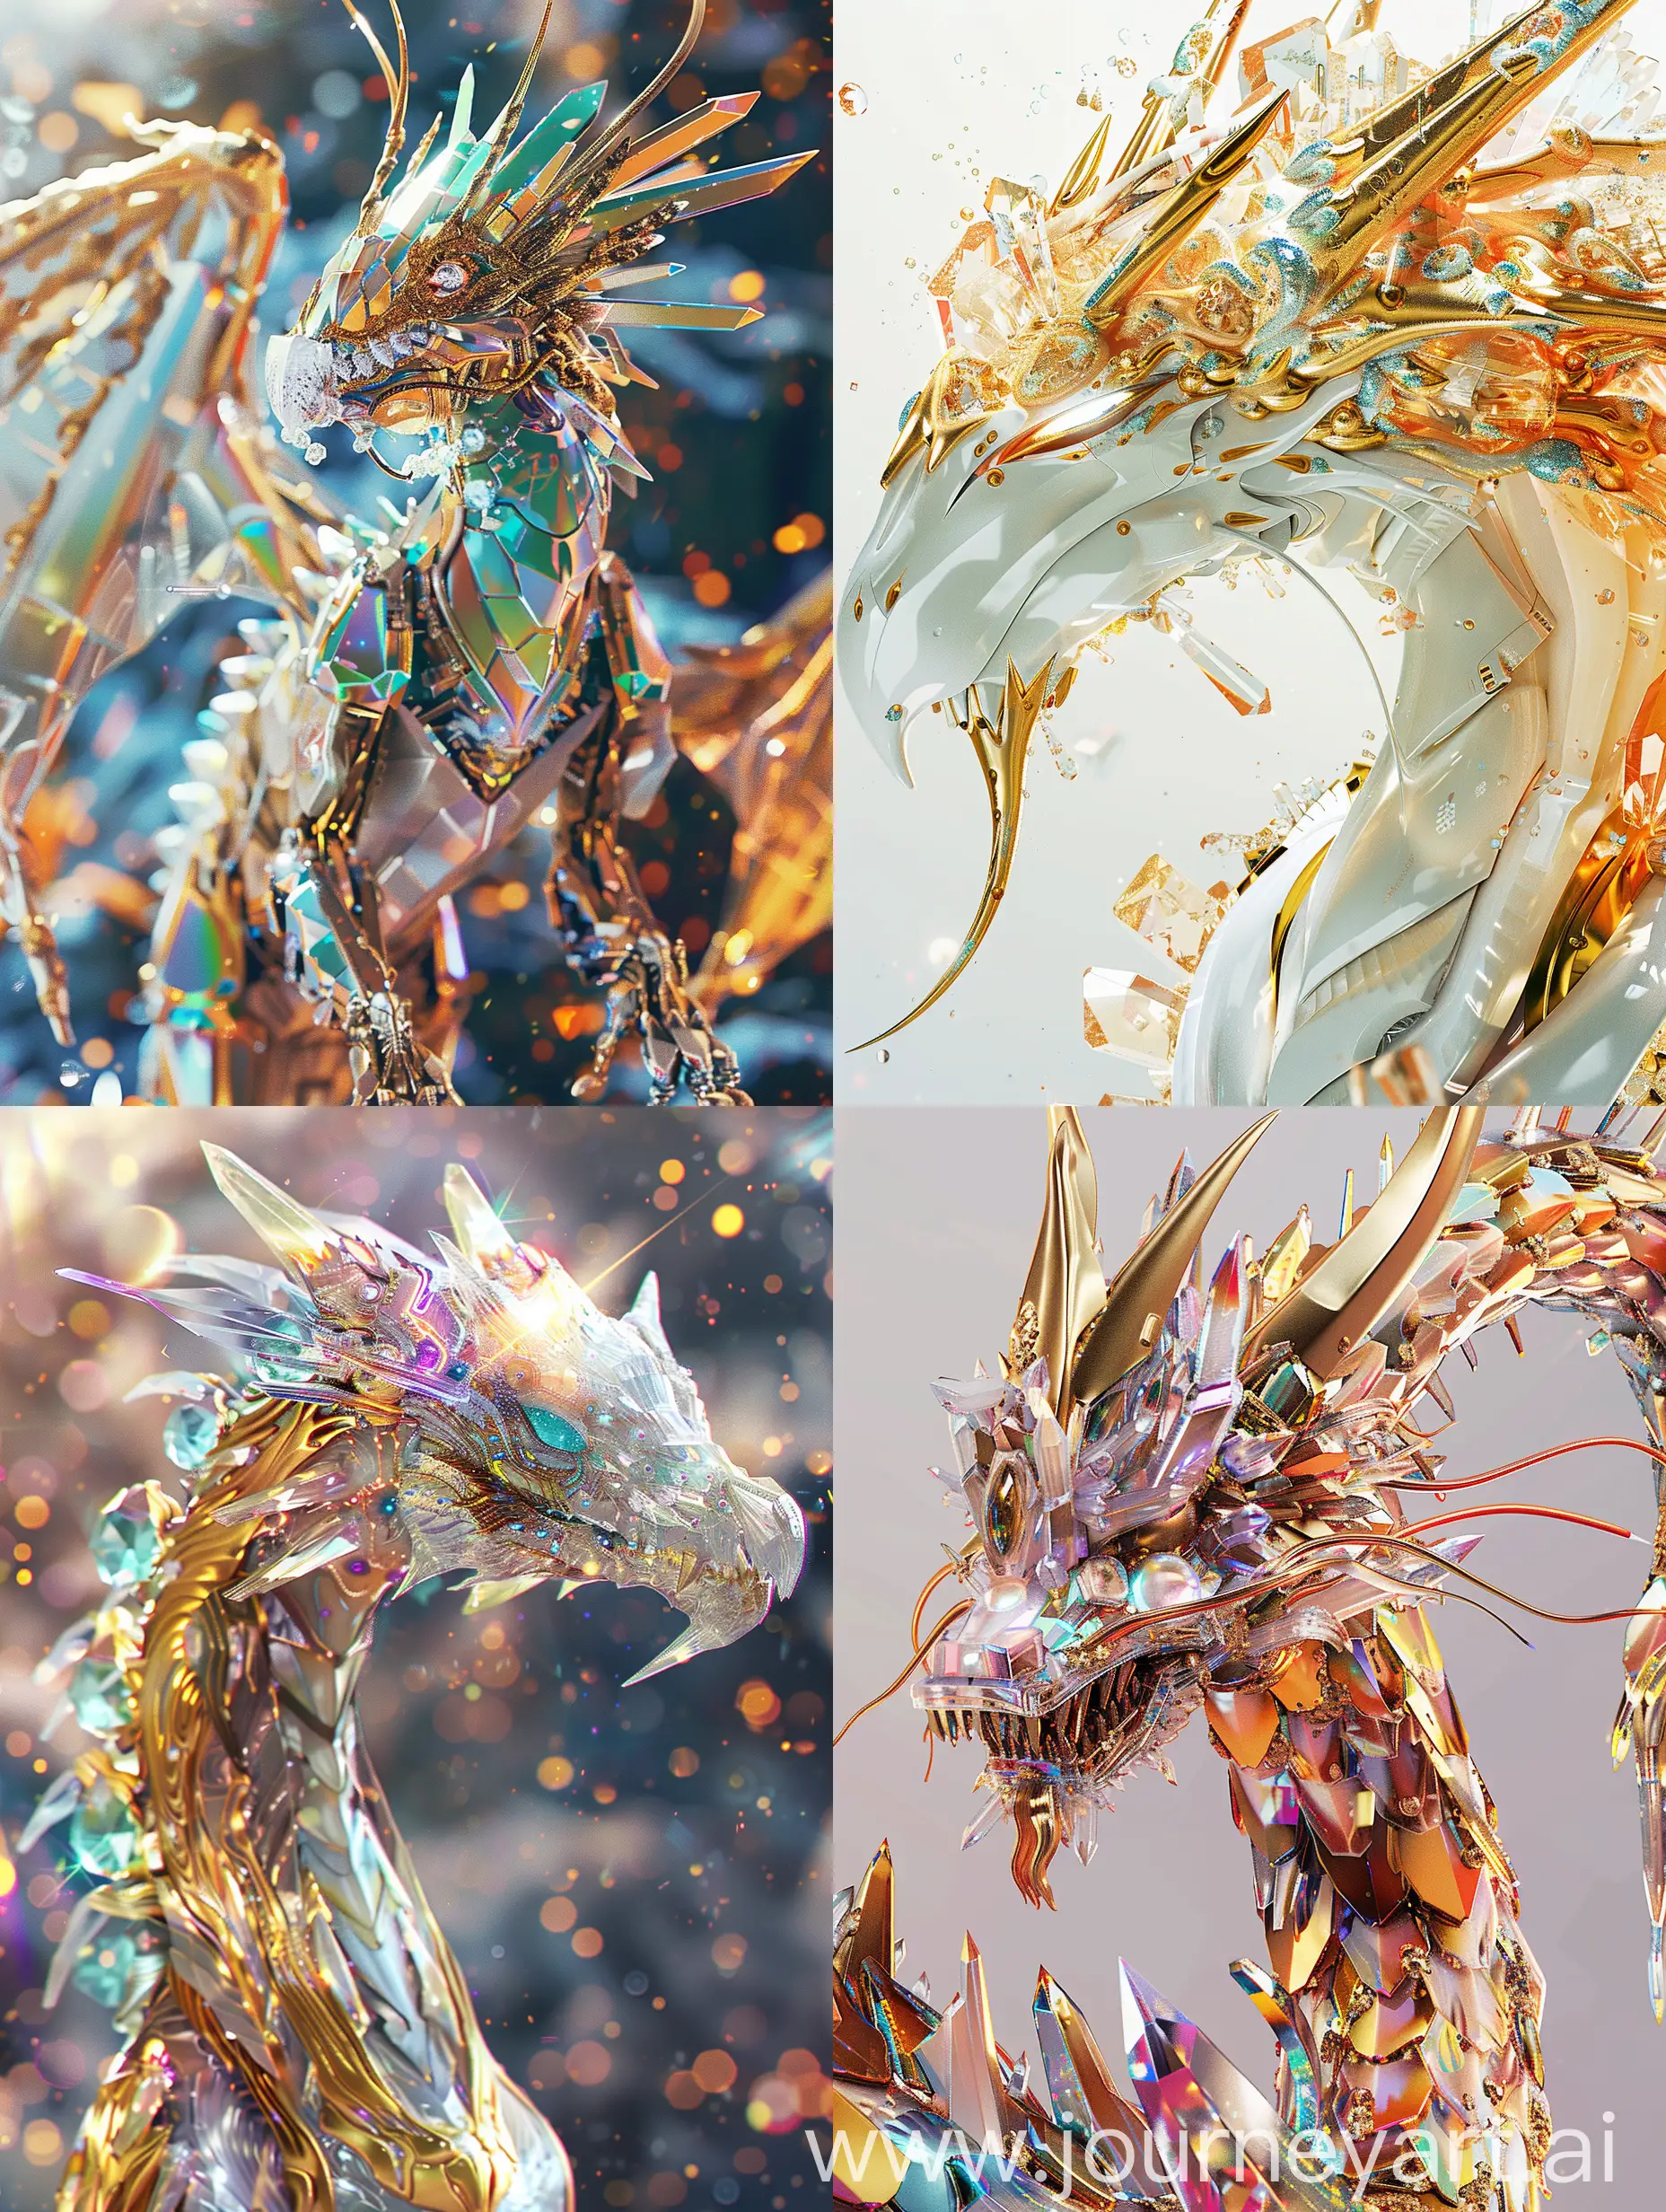 A beautiful prince who is a robot dragon from the future with a coating of extraterrestrial crystal and shiny gold, with a lot of detail and a beautiful end-time image with transparent colors.